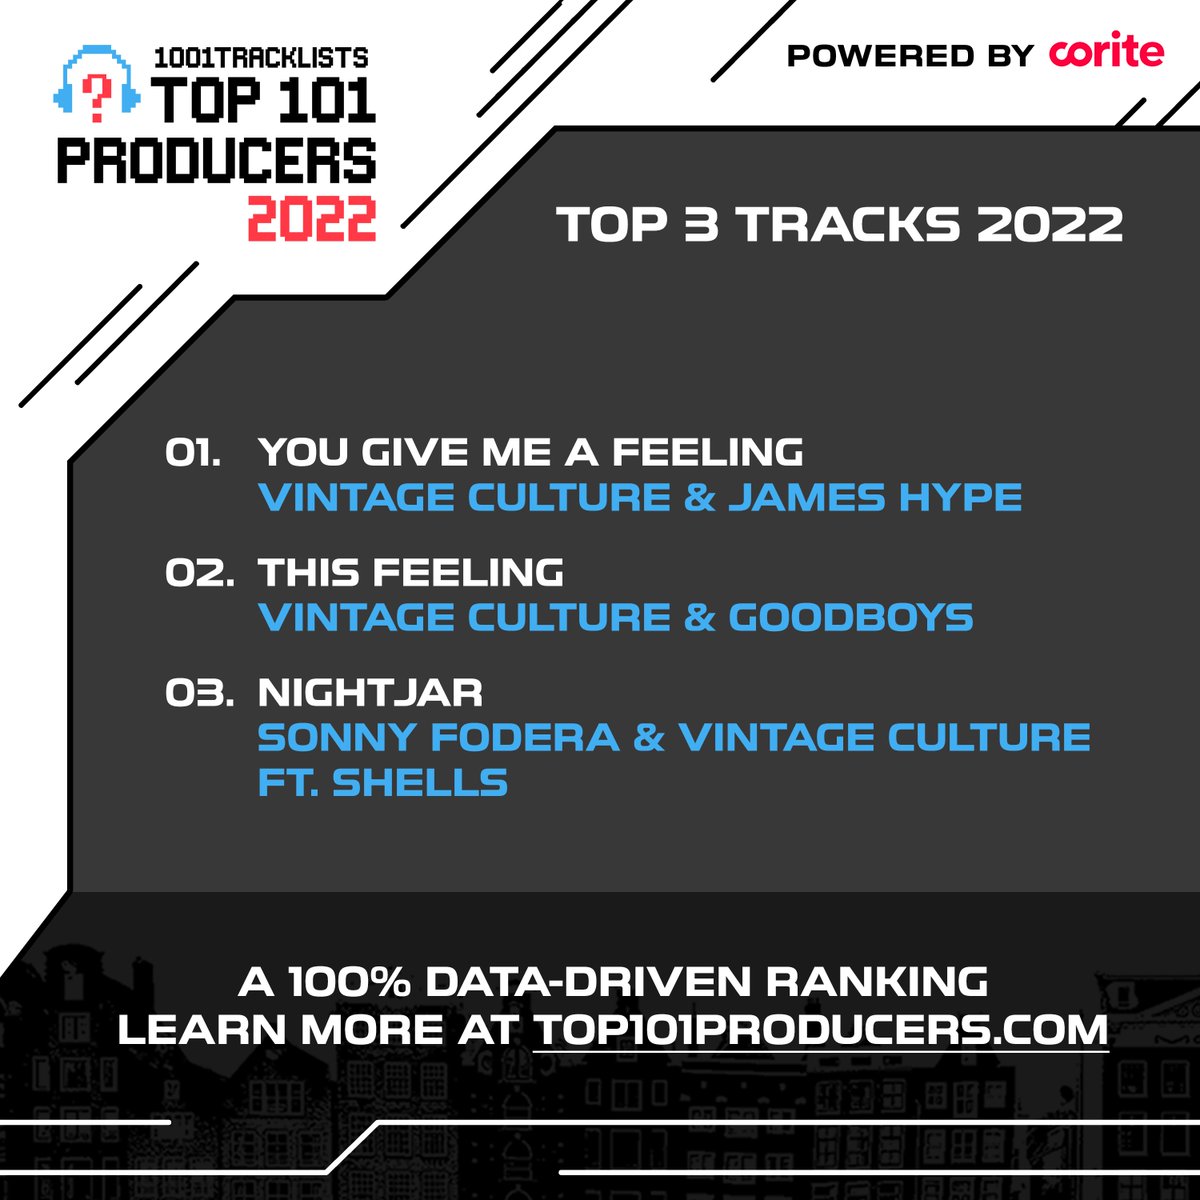 After another incredible year of releases on @InsomniacRecs and @DefectedRecords, last year’s winner @VintageCulture finishes in 2nd place in the #Top101Producers2022!